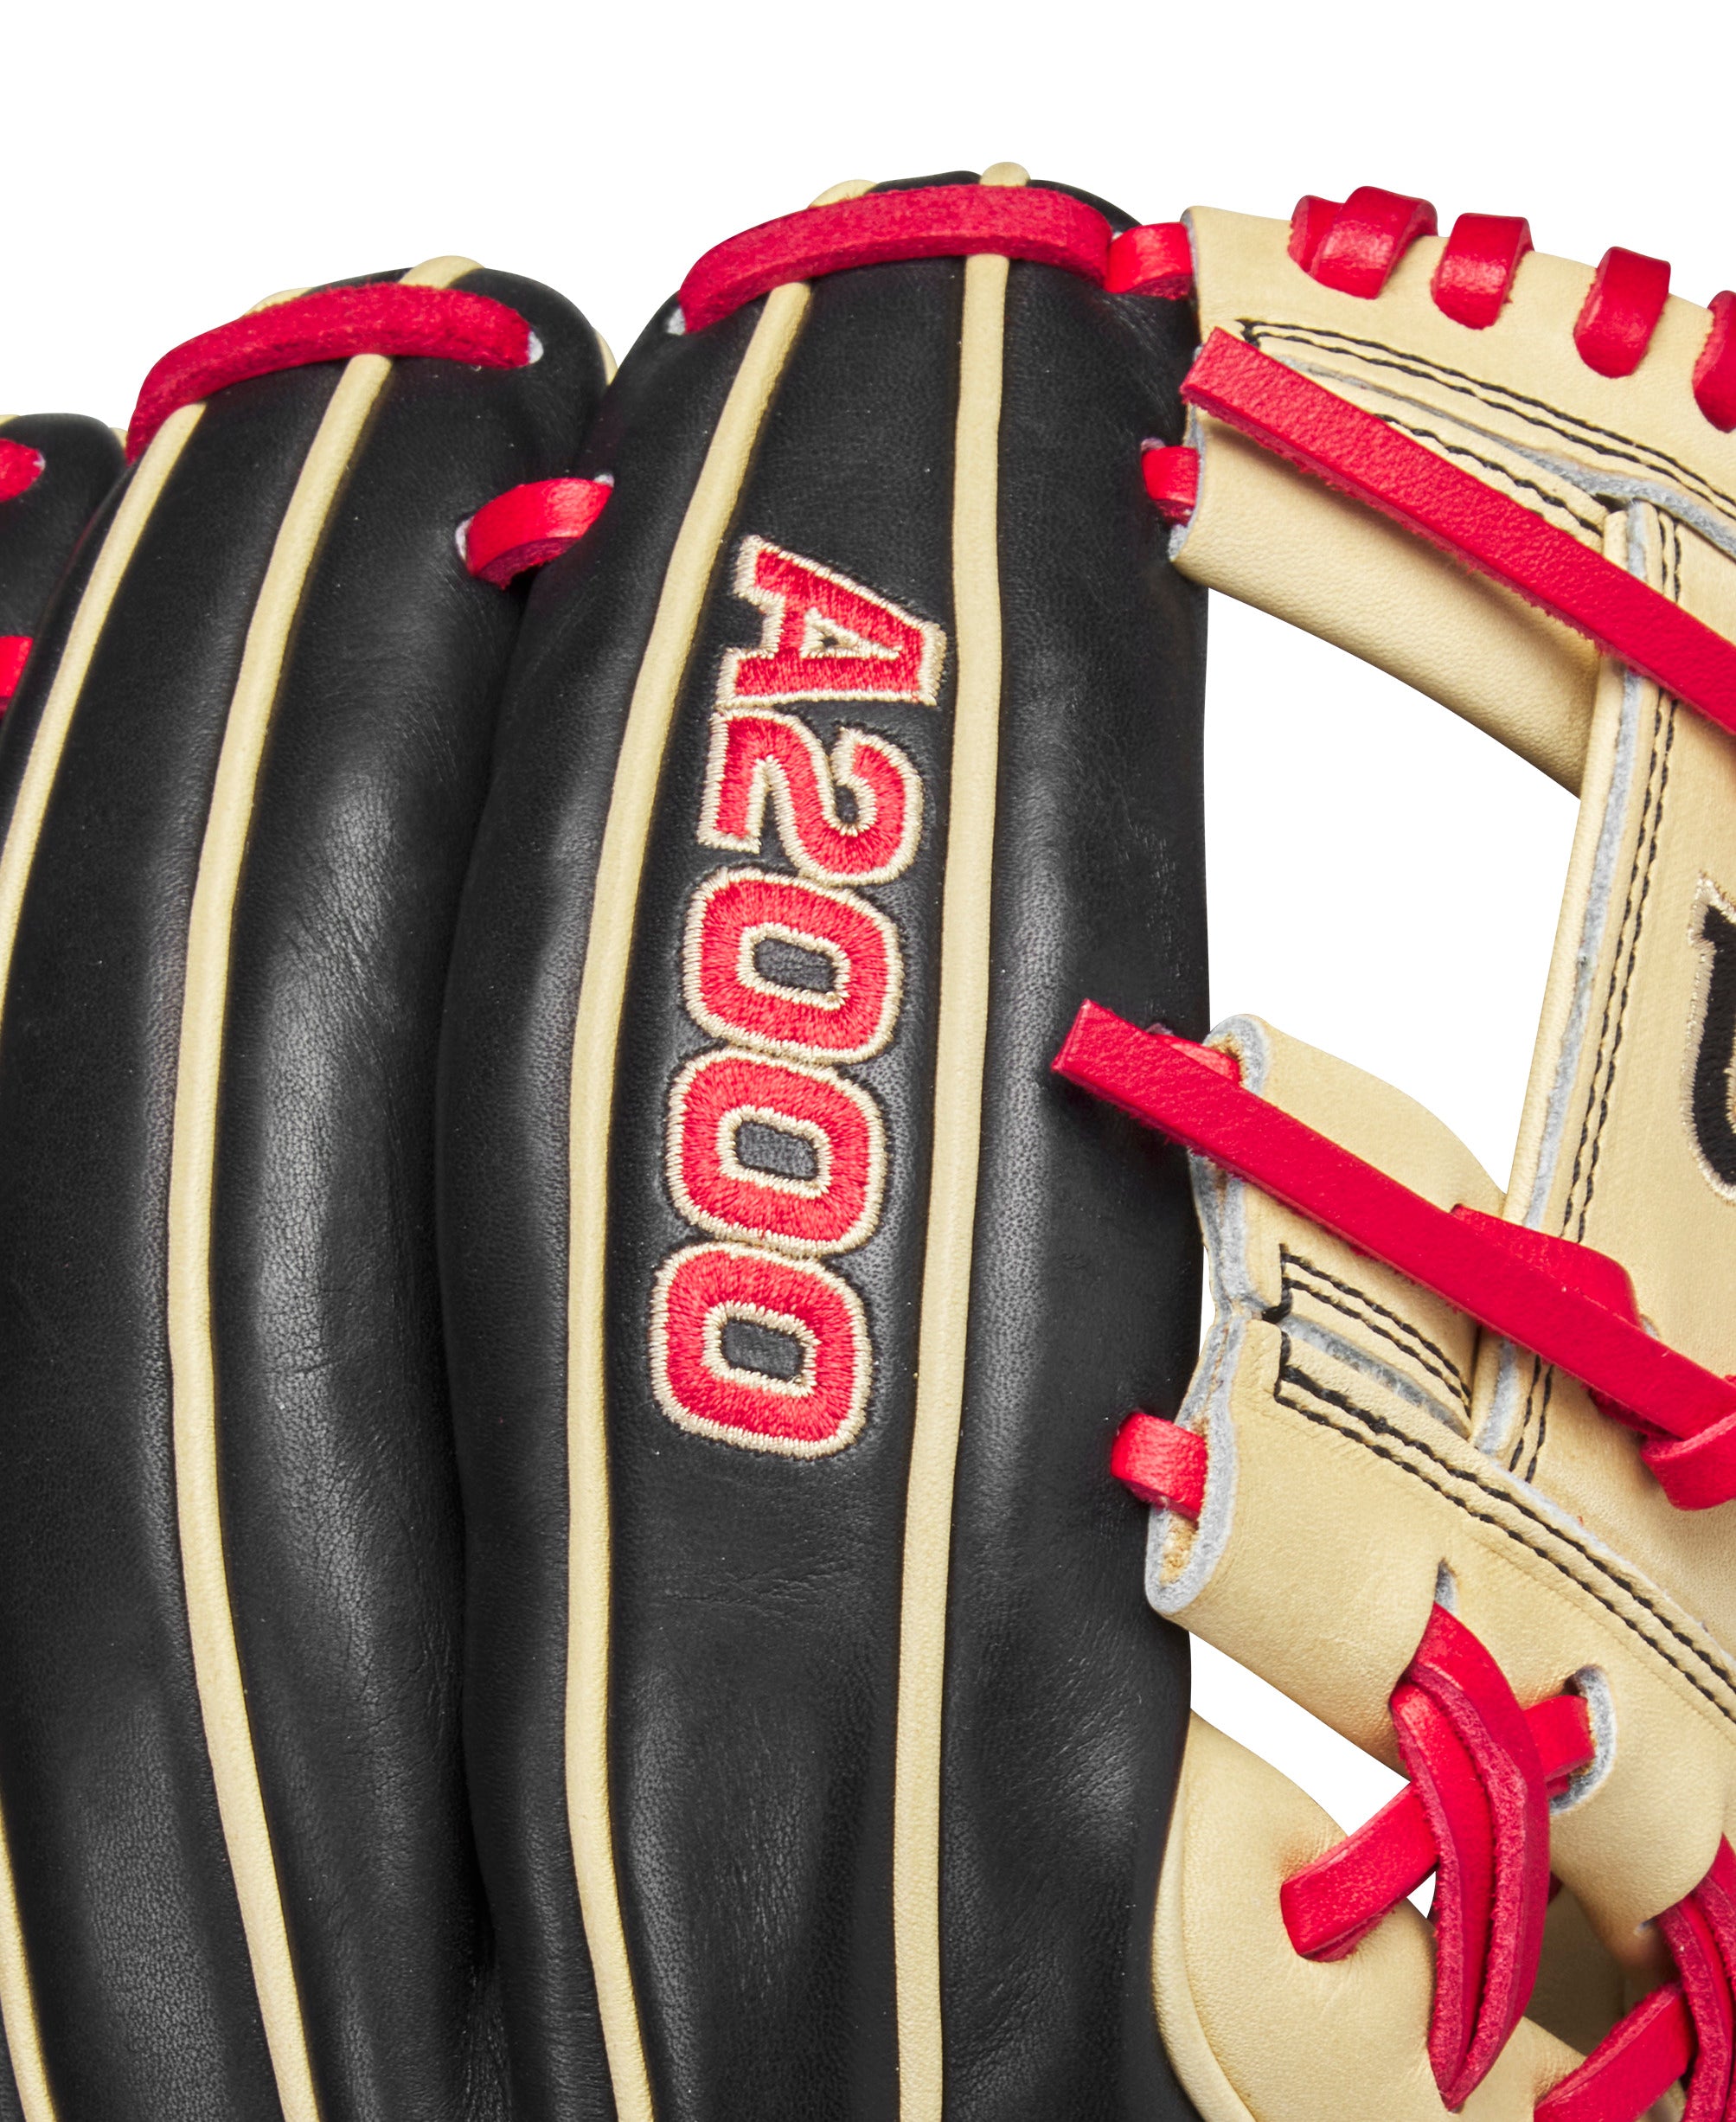 Wilson A2000 October 2023 Glove of the Month (GOTM) Plaid 11.5